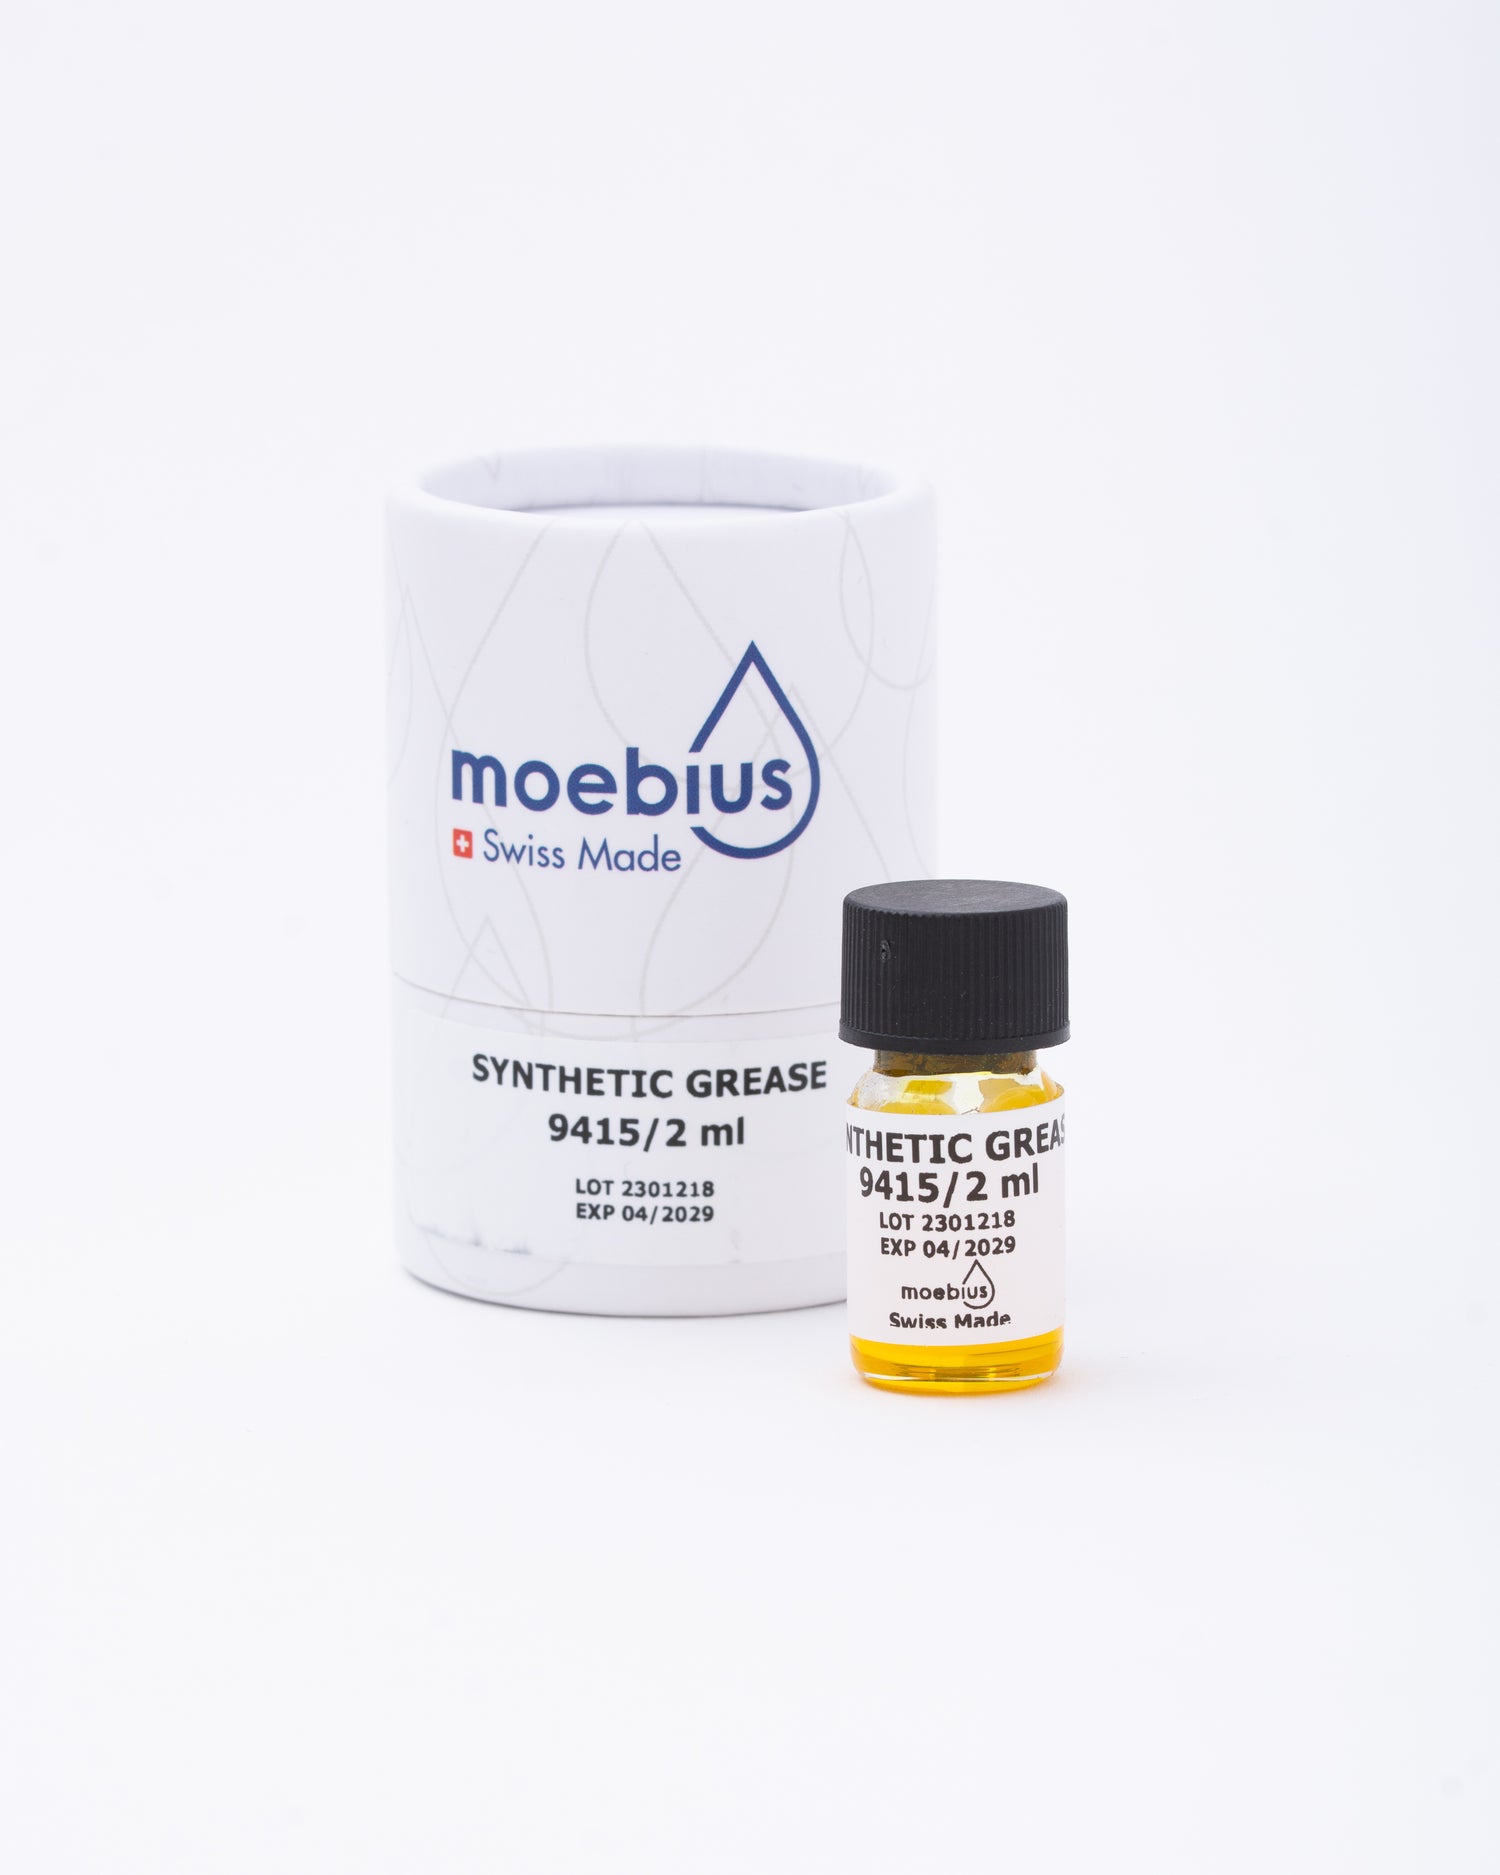 Lubricant Kit for Mechanical Watches, Moebius